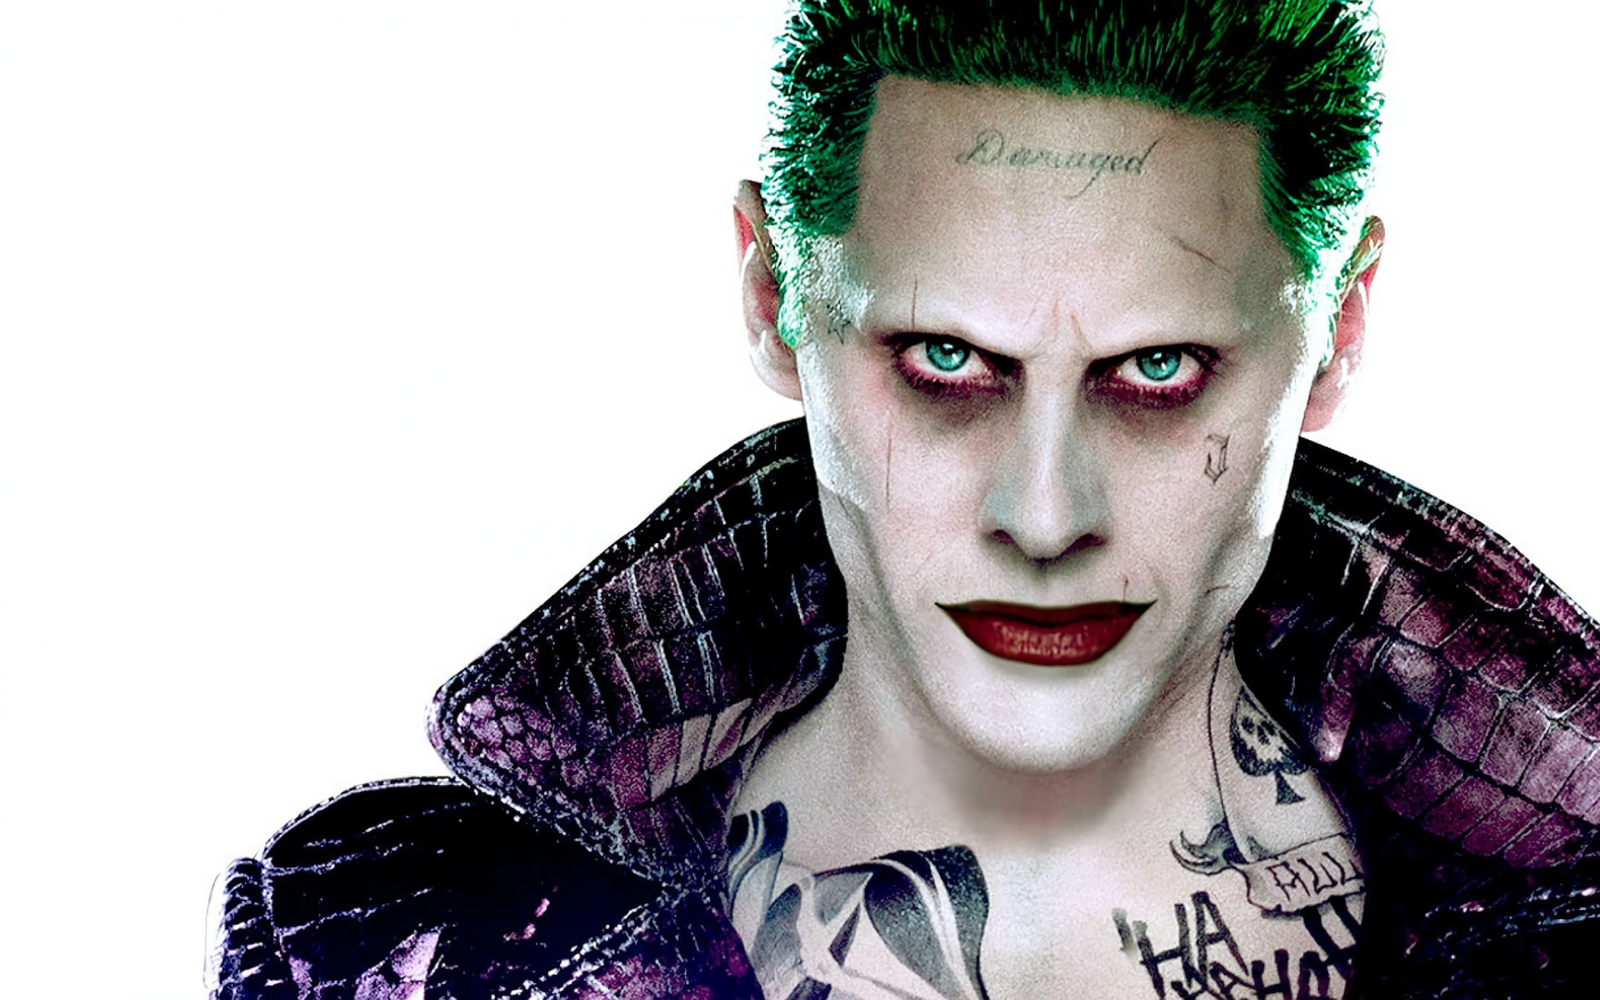 I'm Proud To Be A Part Of It: Jared Leto On Playing 'The Joker' In The DC Extended Universe